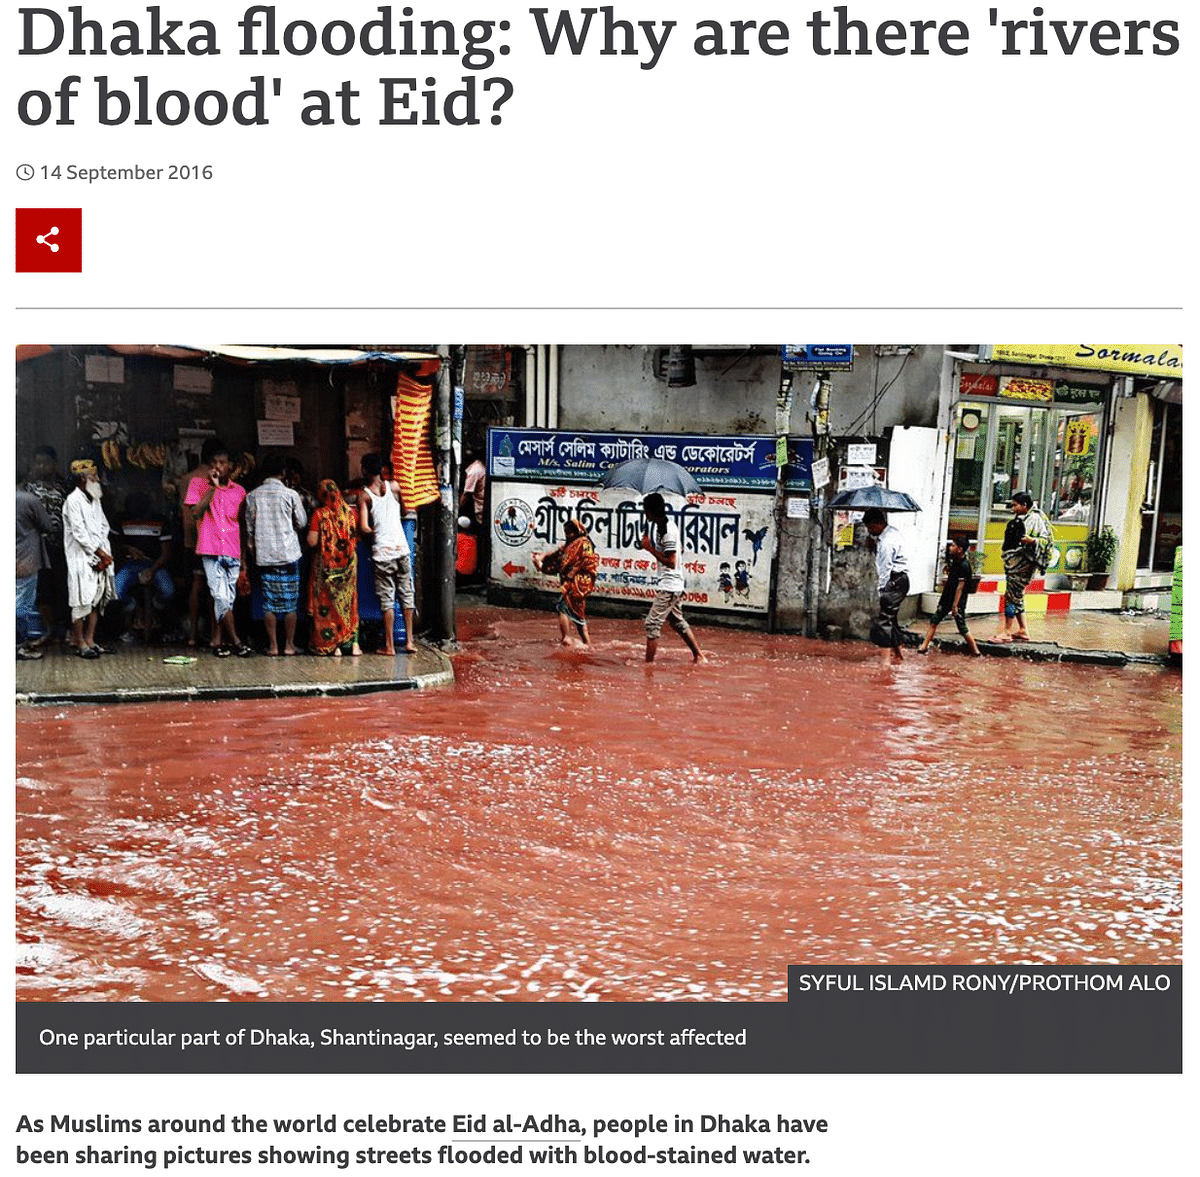 The image is from 2016 when rainwater mixed with the blood of slaughtered animals during Bakra Eid in Dhaka.